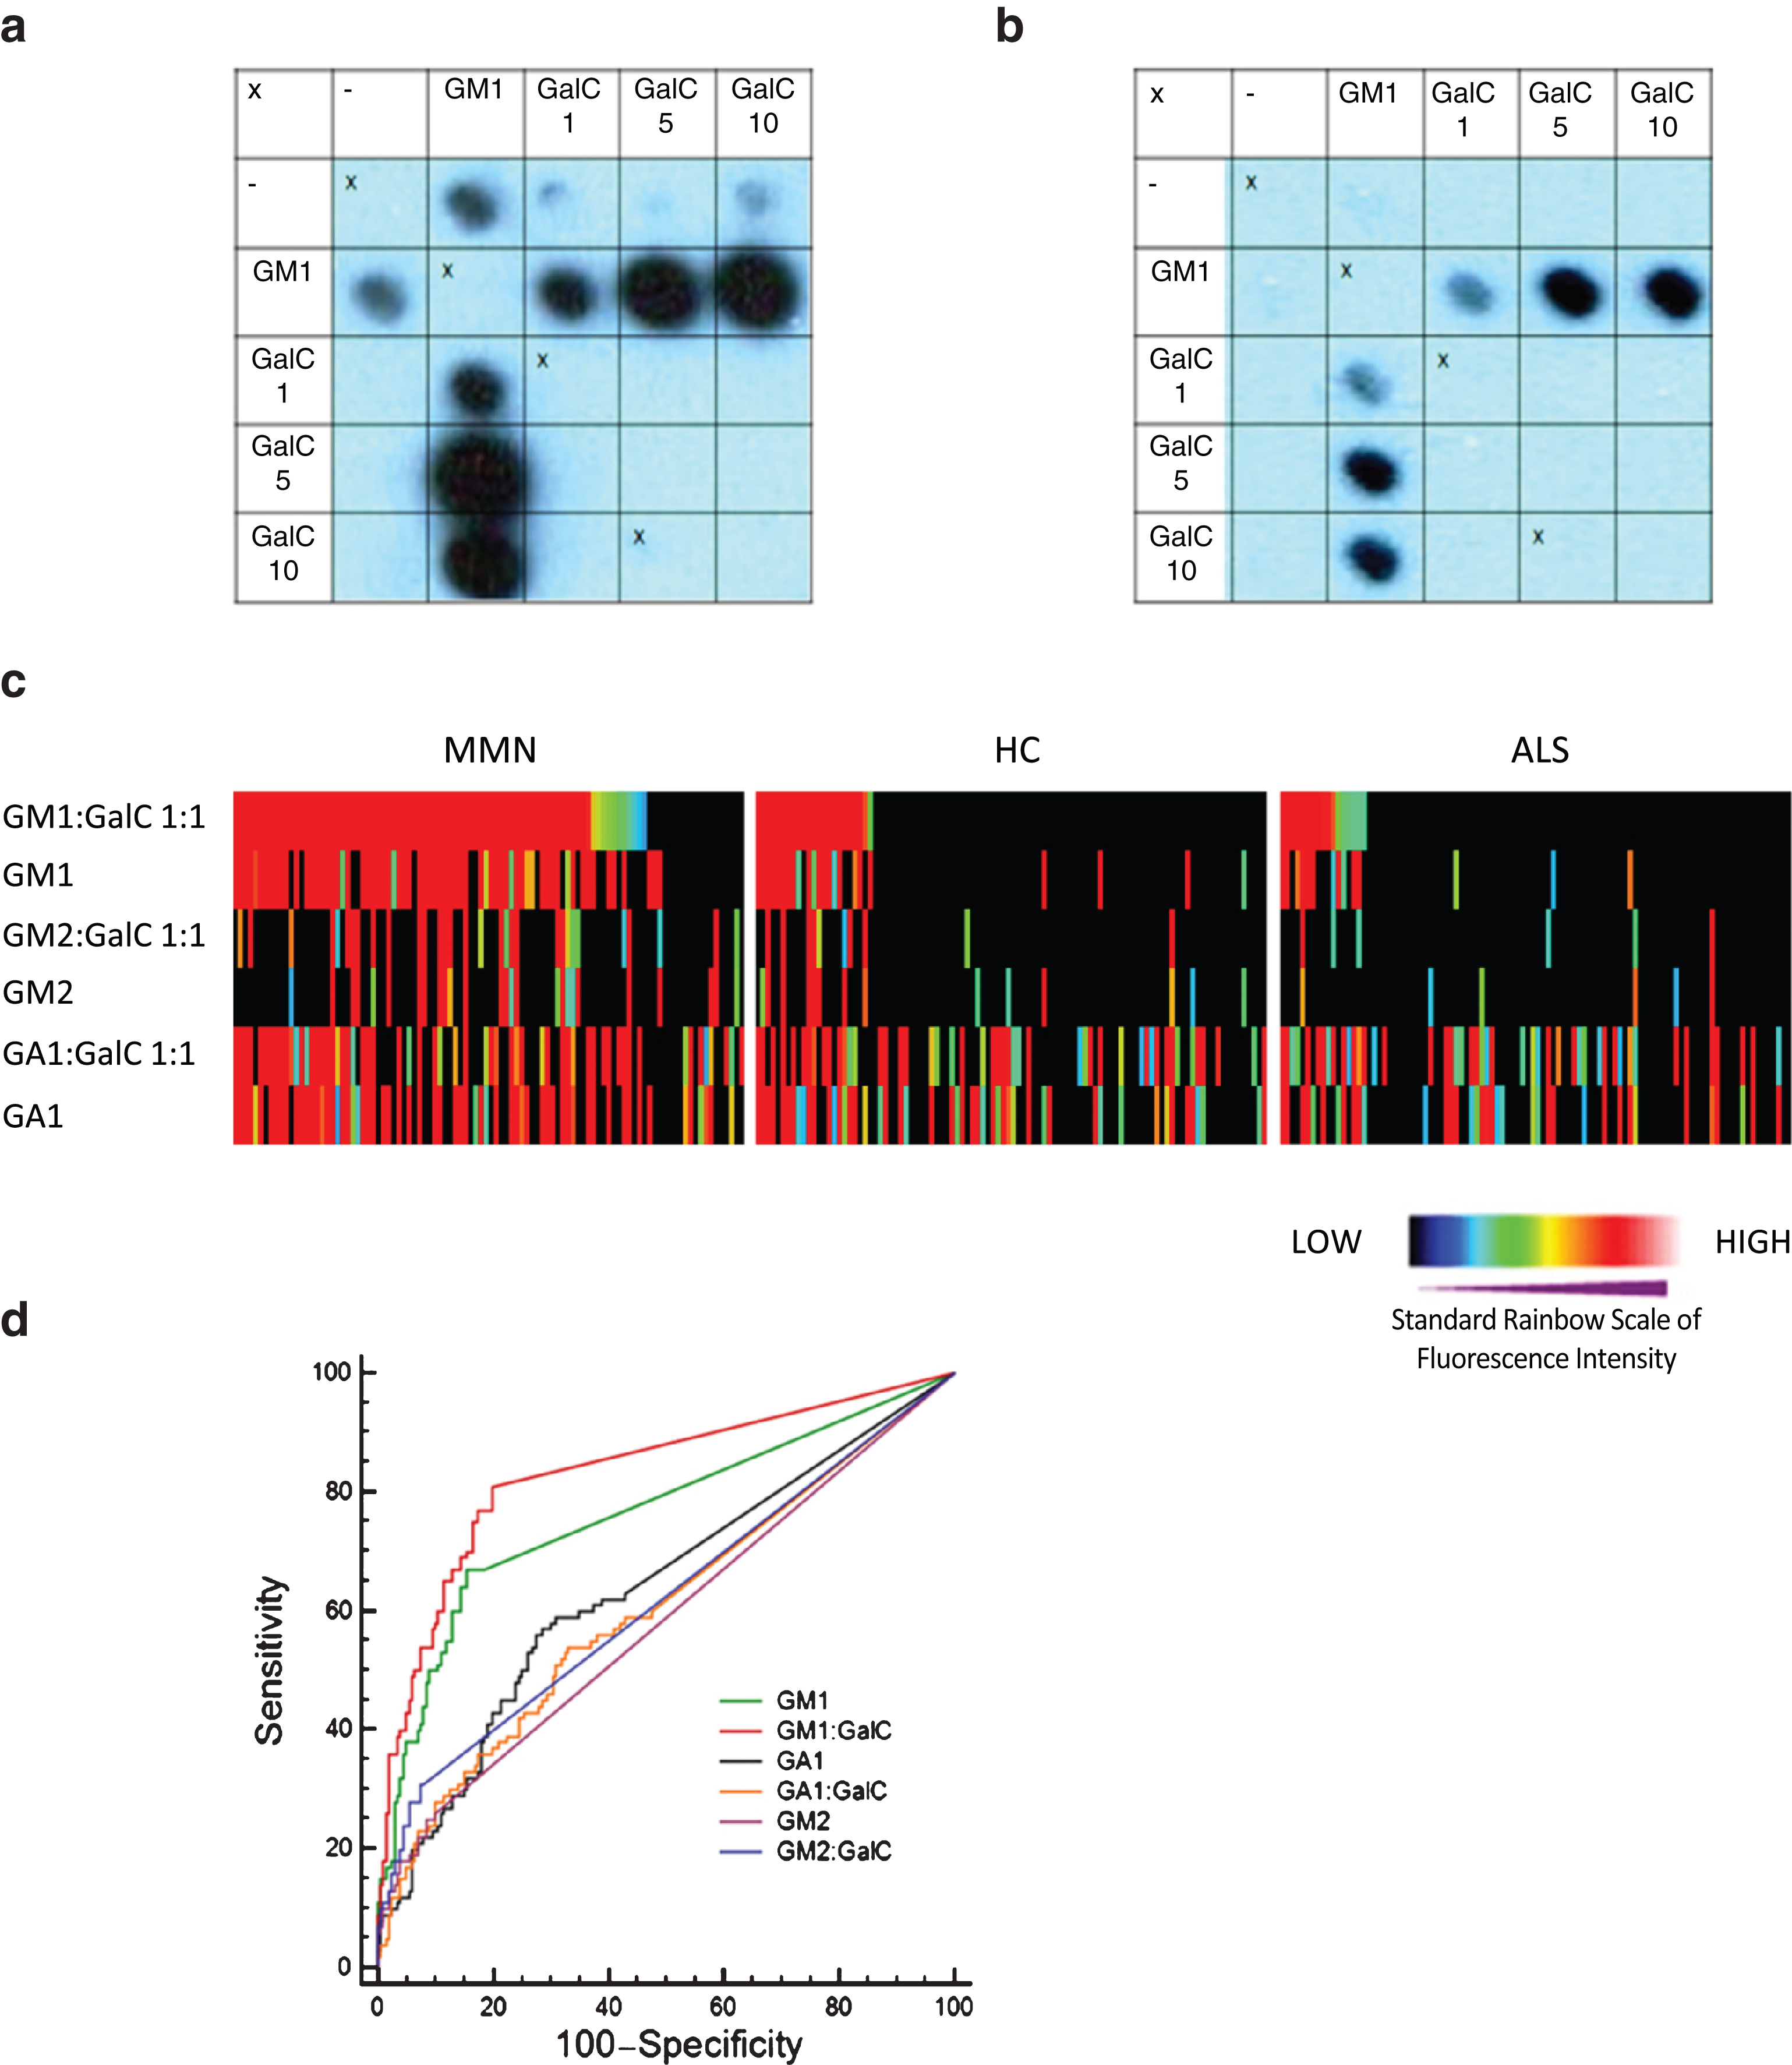 Panel a. Glycoarray grids illustrating that antibody binding to GM1 is enhanced by the presence of GalC. Panel b. Samples sero-negative for GM1 alone are antibody positive at increasing ratios of GM1:GalC. Panel c. Heat map illustration of all 300 serum samples tested by glycoarray. Each sample is colour coded according to the intensity of binding to each target (red represents the strongest down through the rainbow scale to blue which is weakest and black equals no binding), and data has been sorted by decreasing GM1:GalC intensity in the 3 clinical categories (left to right, top row). Each sample in subsequent vertical column is locked to the intensity order assigned by the top row. Visual inspection of the heat map clearly indicates the positive bias towards GM1:GalC and GM1 binding in the MMN population compared with HC and ALS. Panel d. ROC curve plotting sensitivity against 100-specificity of selective lipid markers tested on glycoarray. For each lipid target, an area under the curve (AUC) is calculated, in which the best lipid marker will have an AUC closest to 1. In this example GM1:GalC 1:1 (AUC = 0.834) is determined to be the best discriminator of MMN and control serum samples, and was found to be statistically significant from the second most efficient lipid, GM1 alone (AUC = 0.764, P = 0.0051). (Colours are visible in the online version of the article; http://dx.doi.org/10.3233/JND-150080)